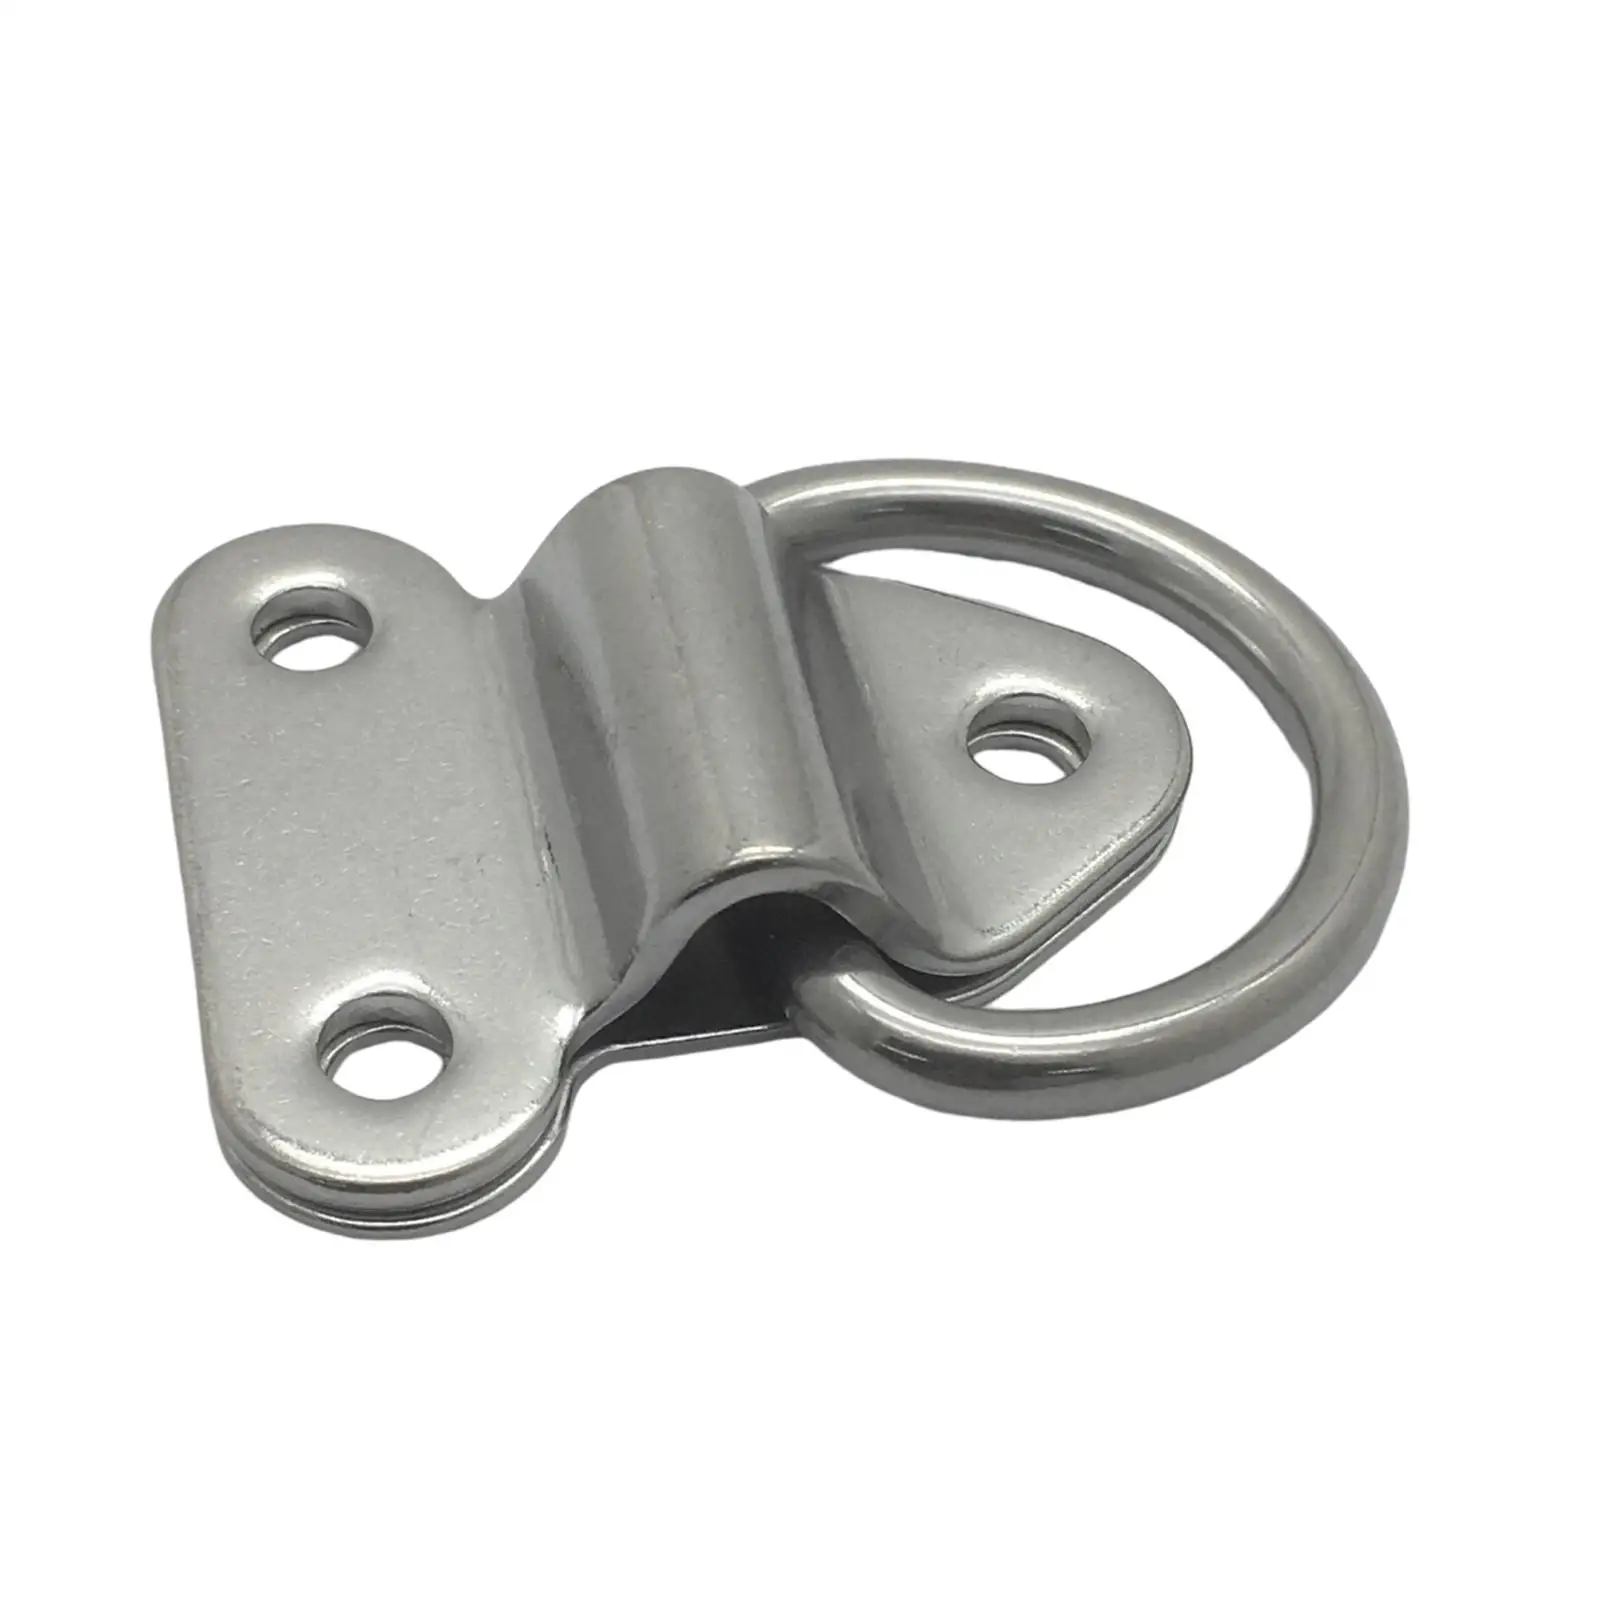 Folding Deck Pad Eyes Lashing D Ring Fastening Anchor Binding Ring Tie Down Point Anchor Pull Ring for Ship Yacht Boats